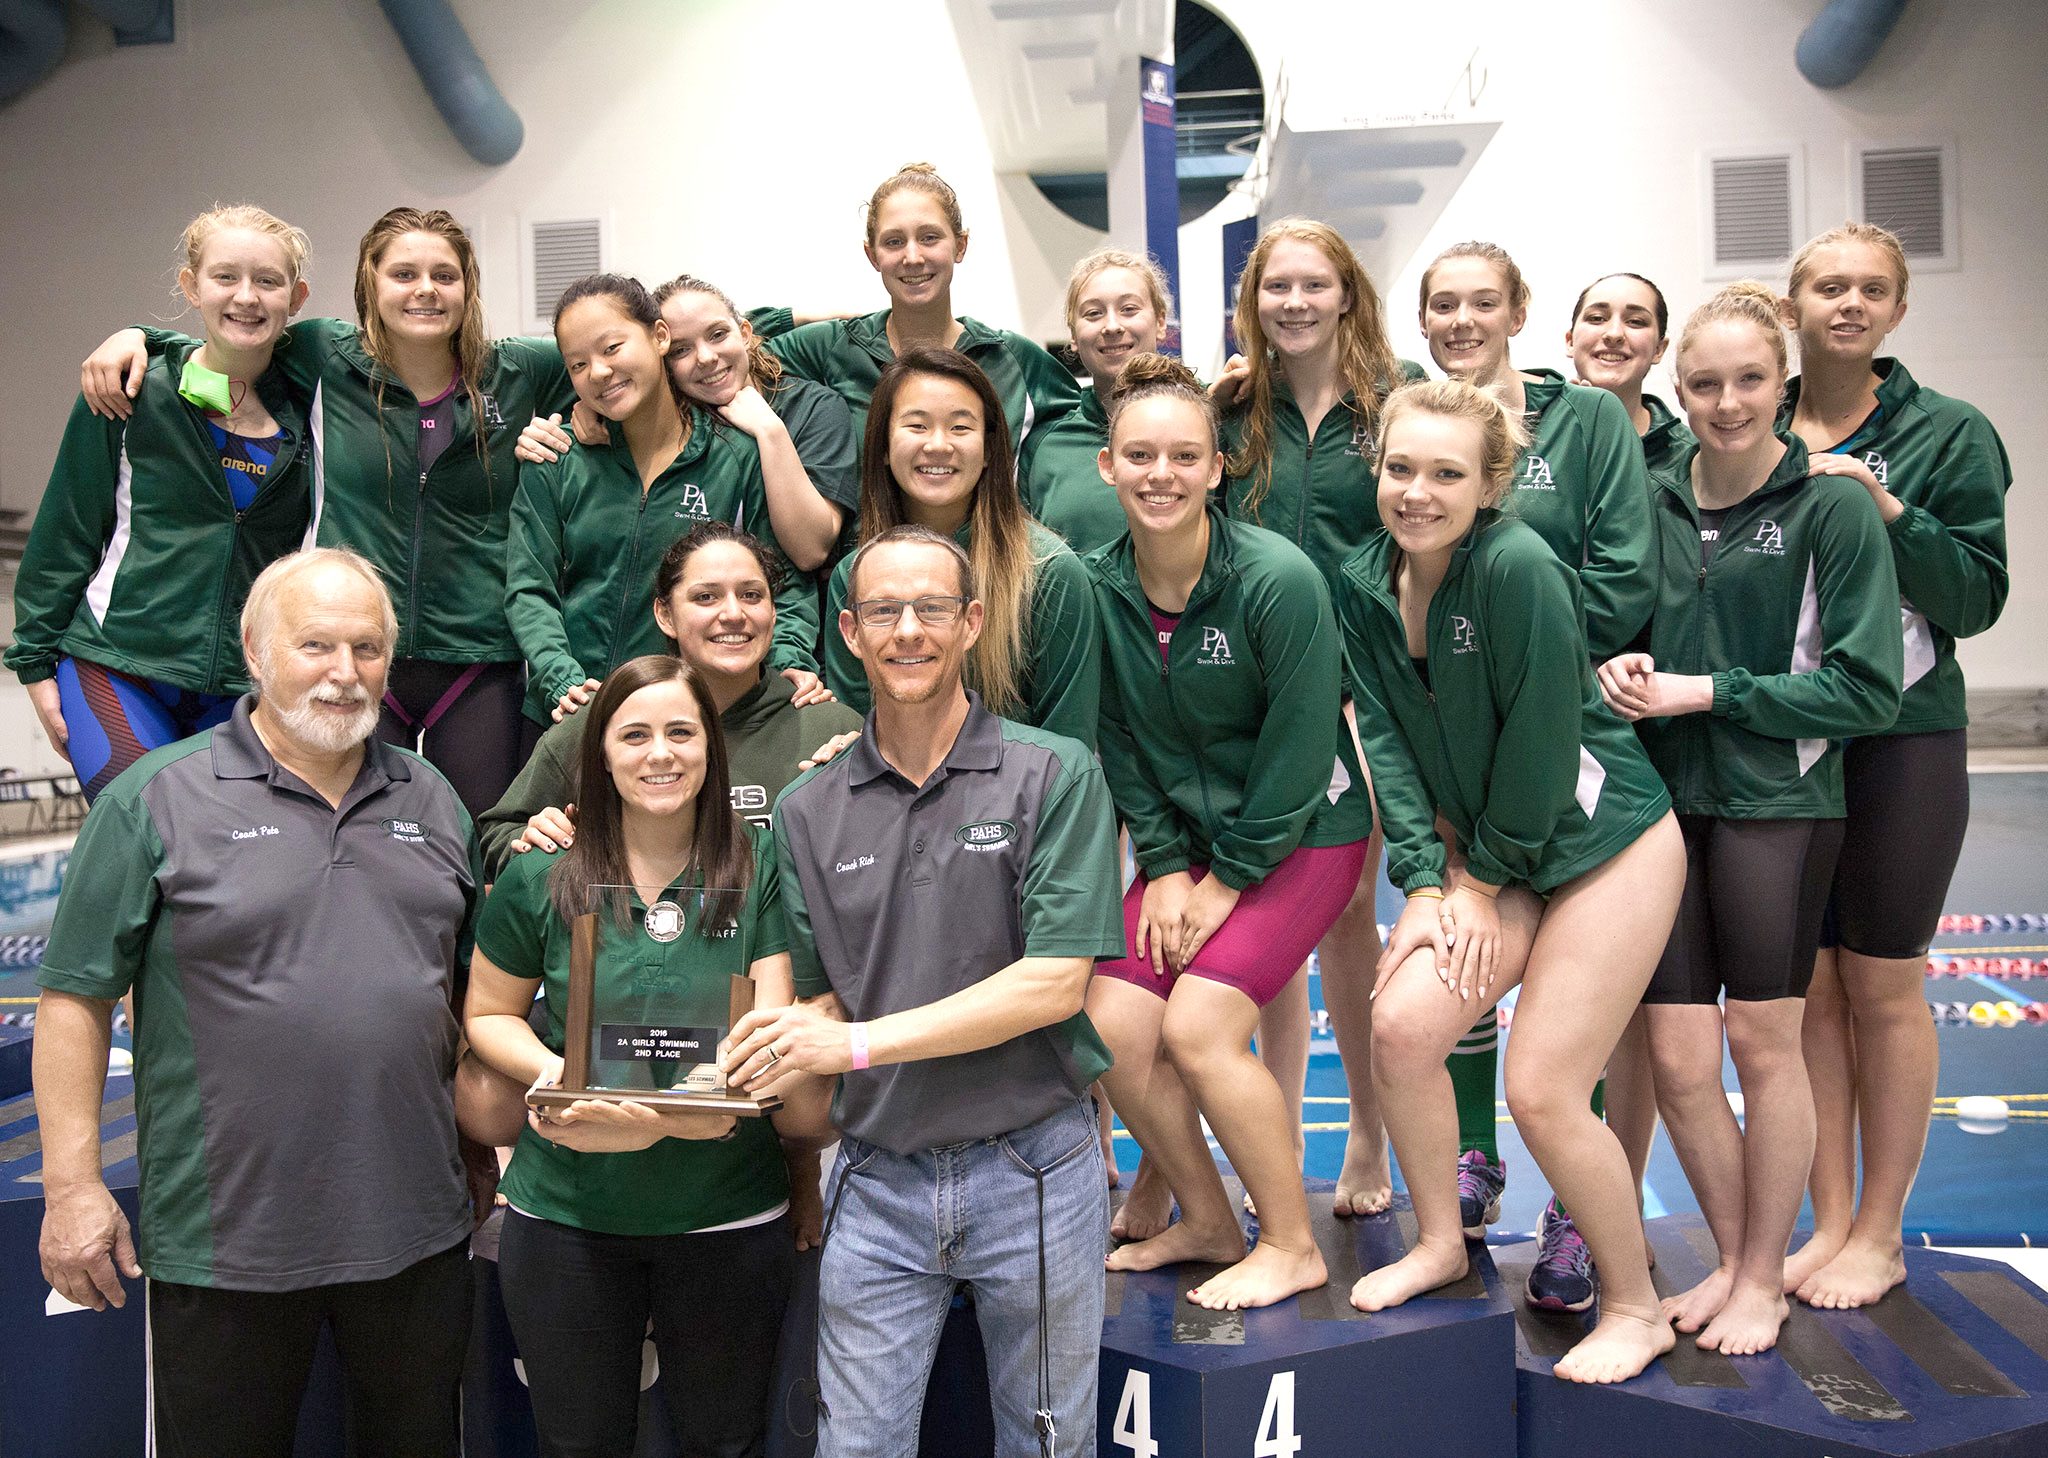 Port Angeles High School photo                                The Port Angeles Swim Team celebrates its second-place finish at the State 2A Swim and Dive Championships at the King County Aquatic Center in Federal Way.